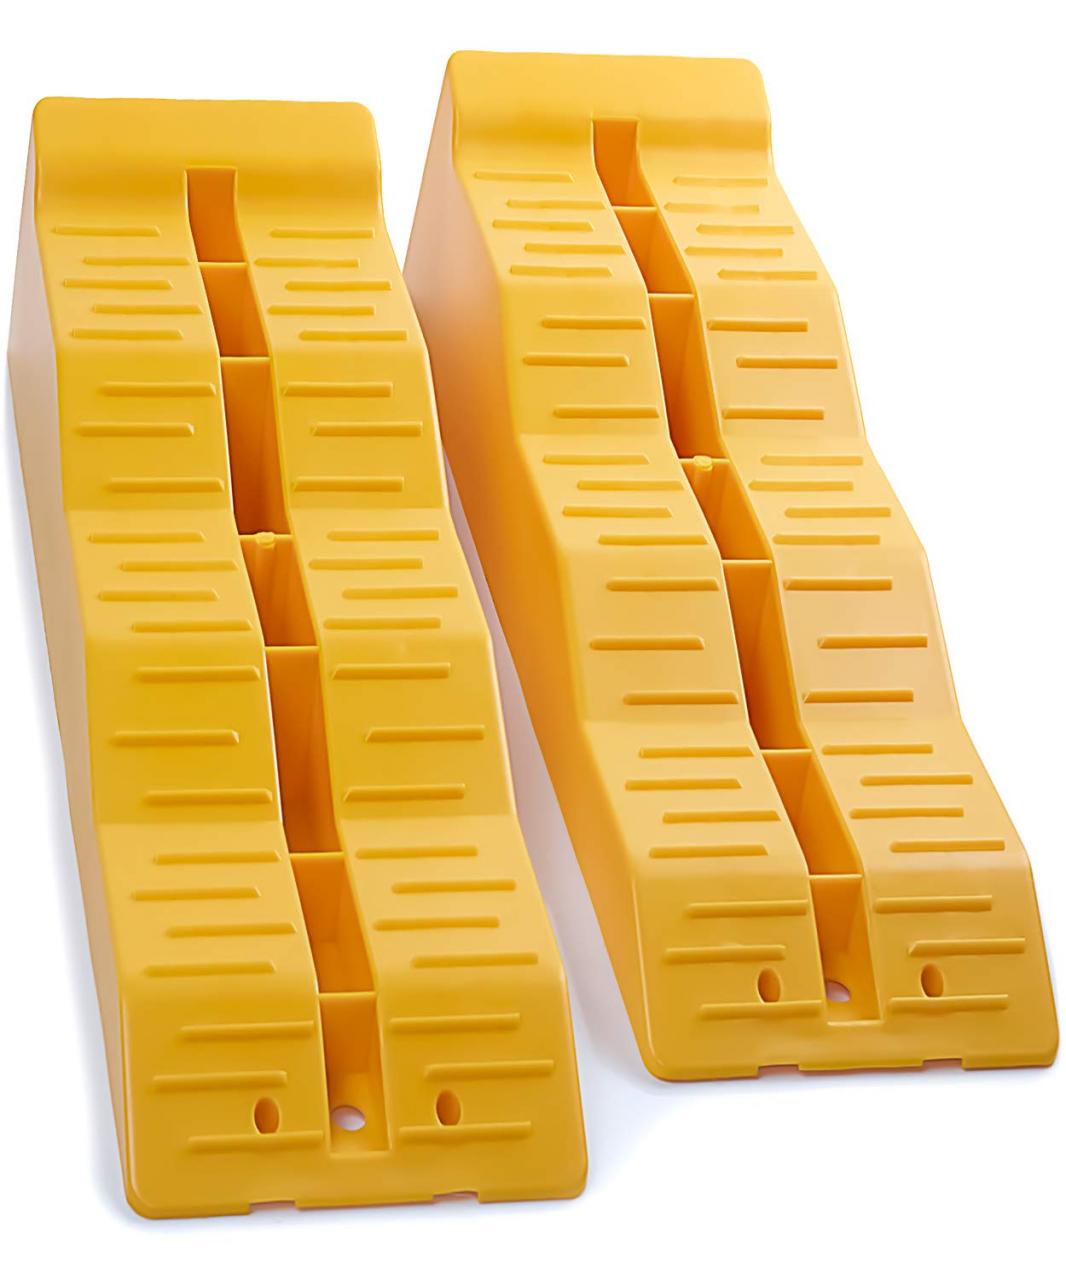 OxGord RV Leveling Ramps - Camper or Trailer Leveler/Wheel Chocks for  Stabilizing Uneven Ground and Parking - Set of 2 Blocks, Yellow- Buy Online  in Indonesia at Desertcart - 43781449.